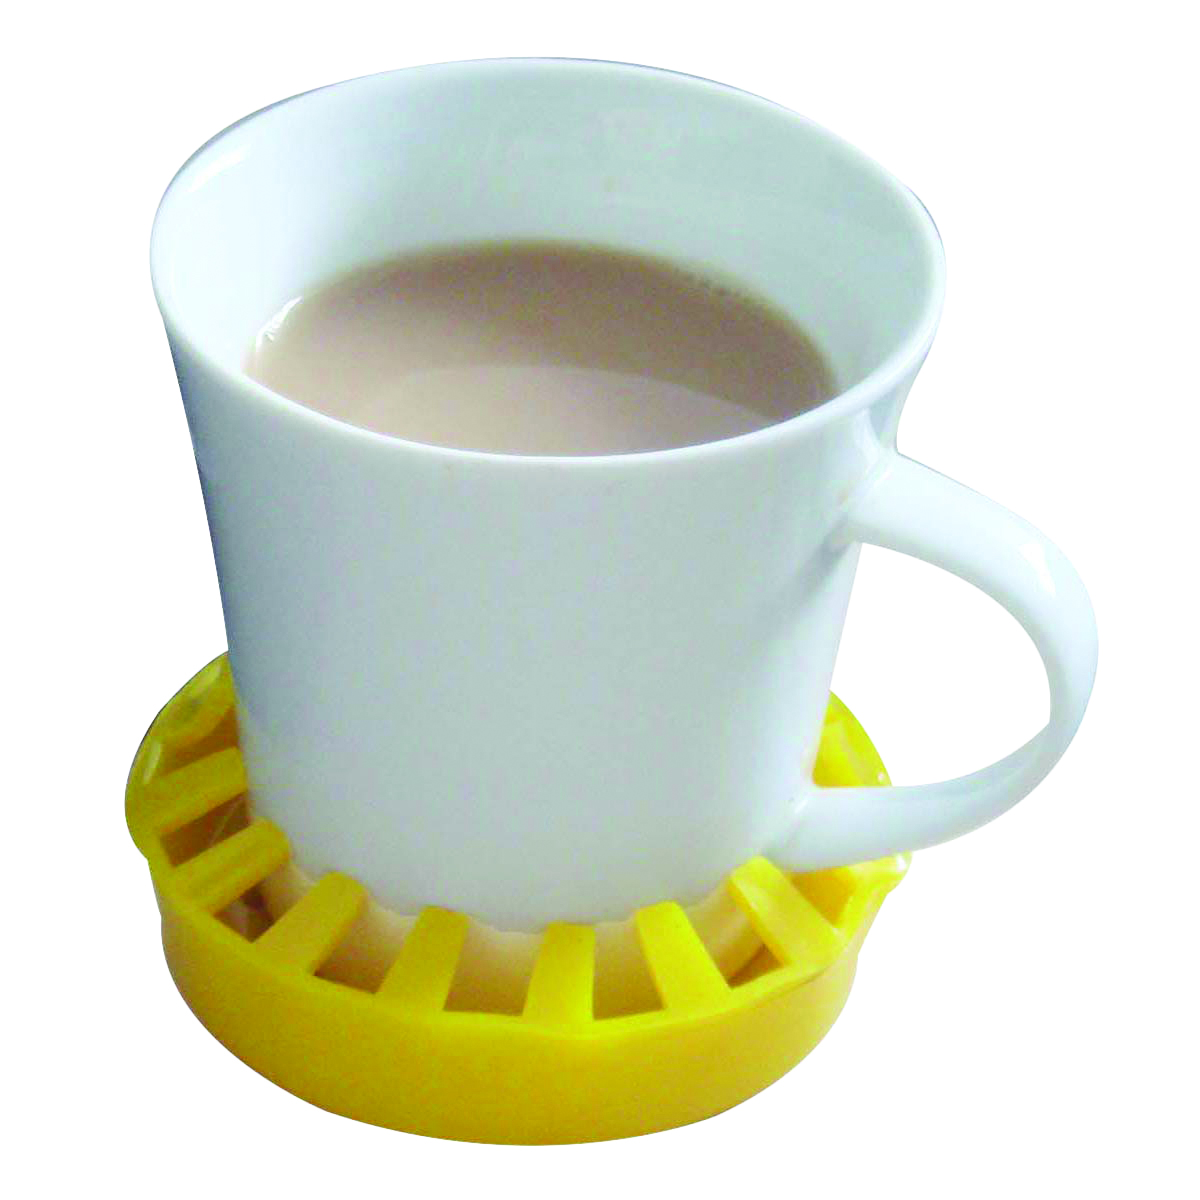 50-1652y 3.5 In. Non-slip Molded Cup, Can & Glass Holder, Yellow